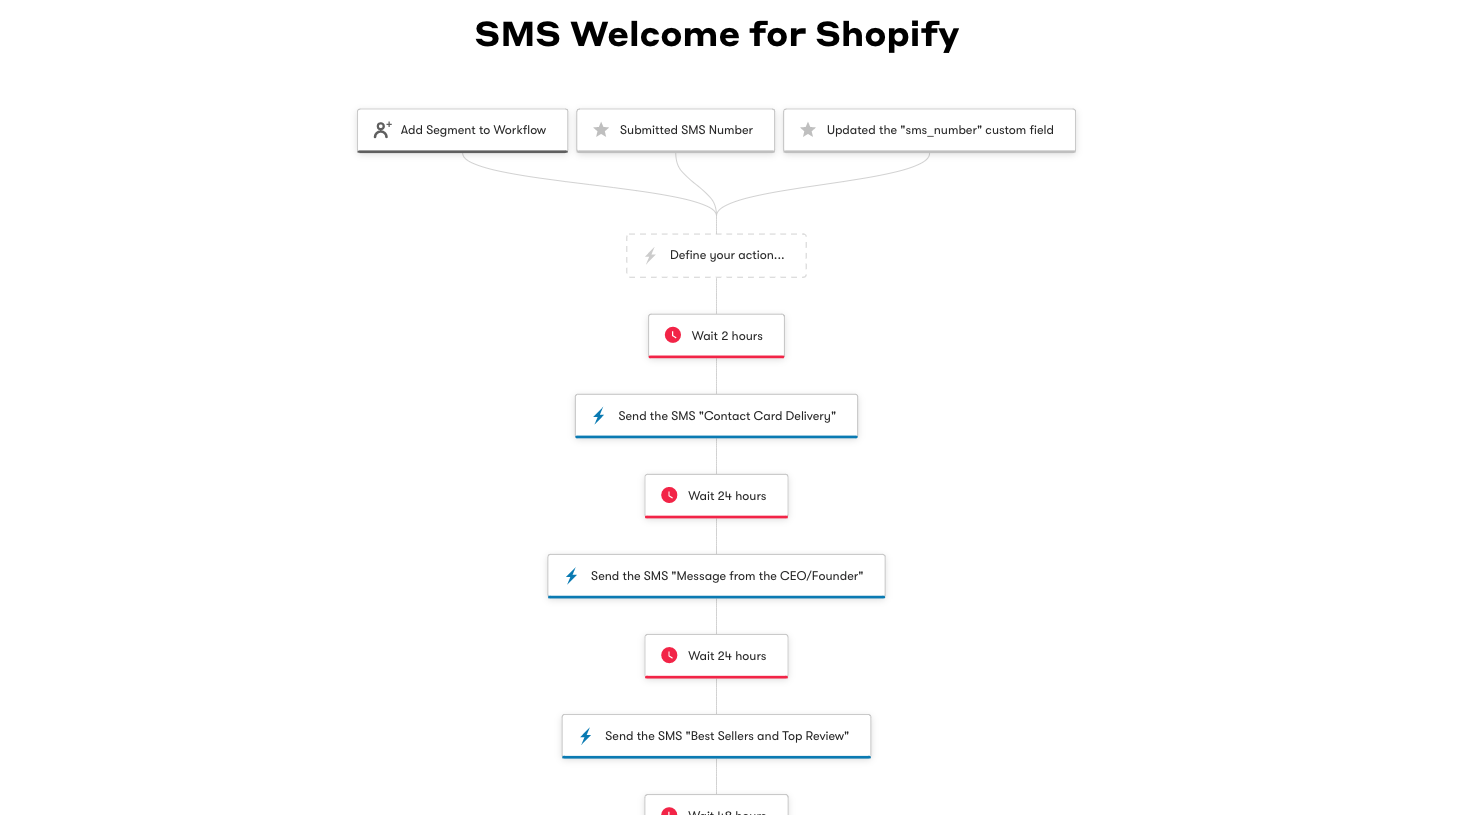 Getting_Started_with_SMS_-_Activate_SMS_WF.png